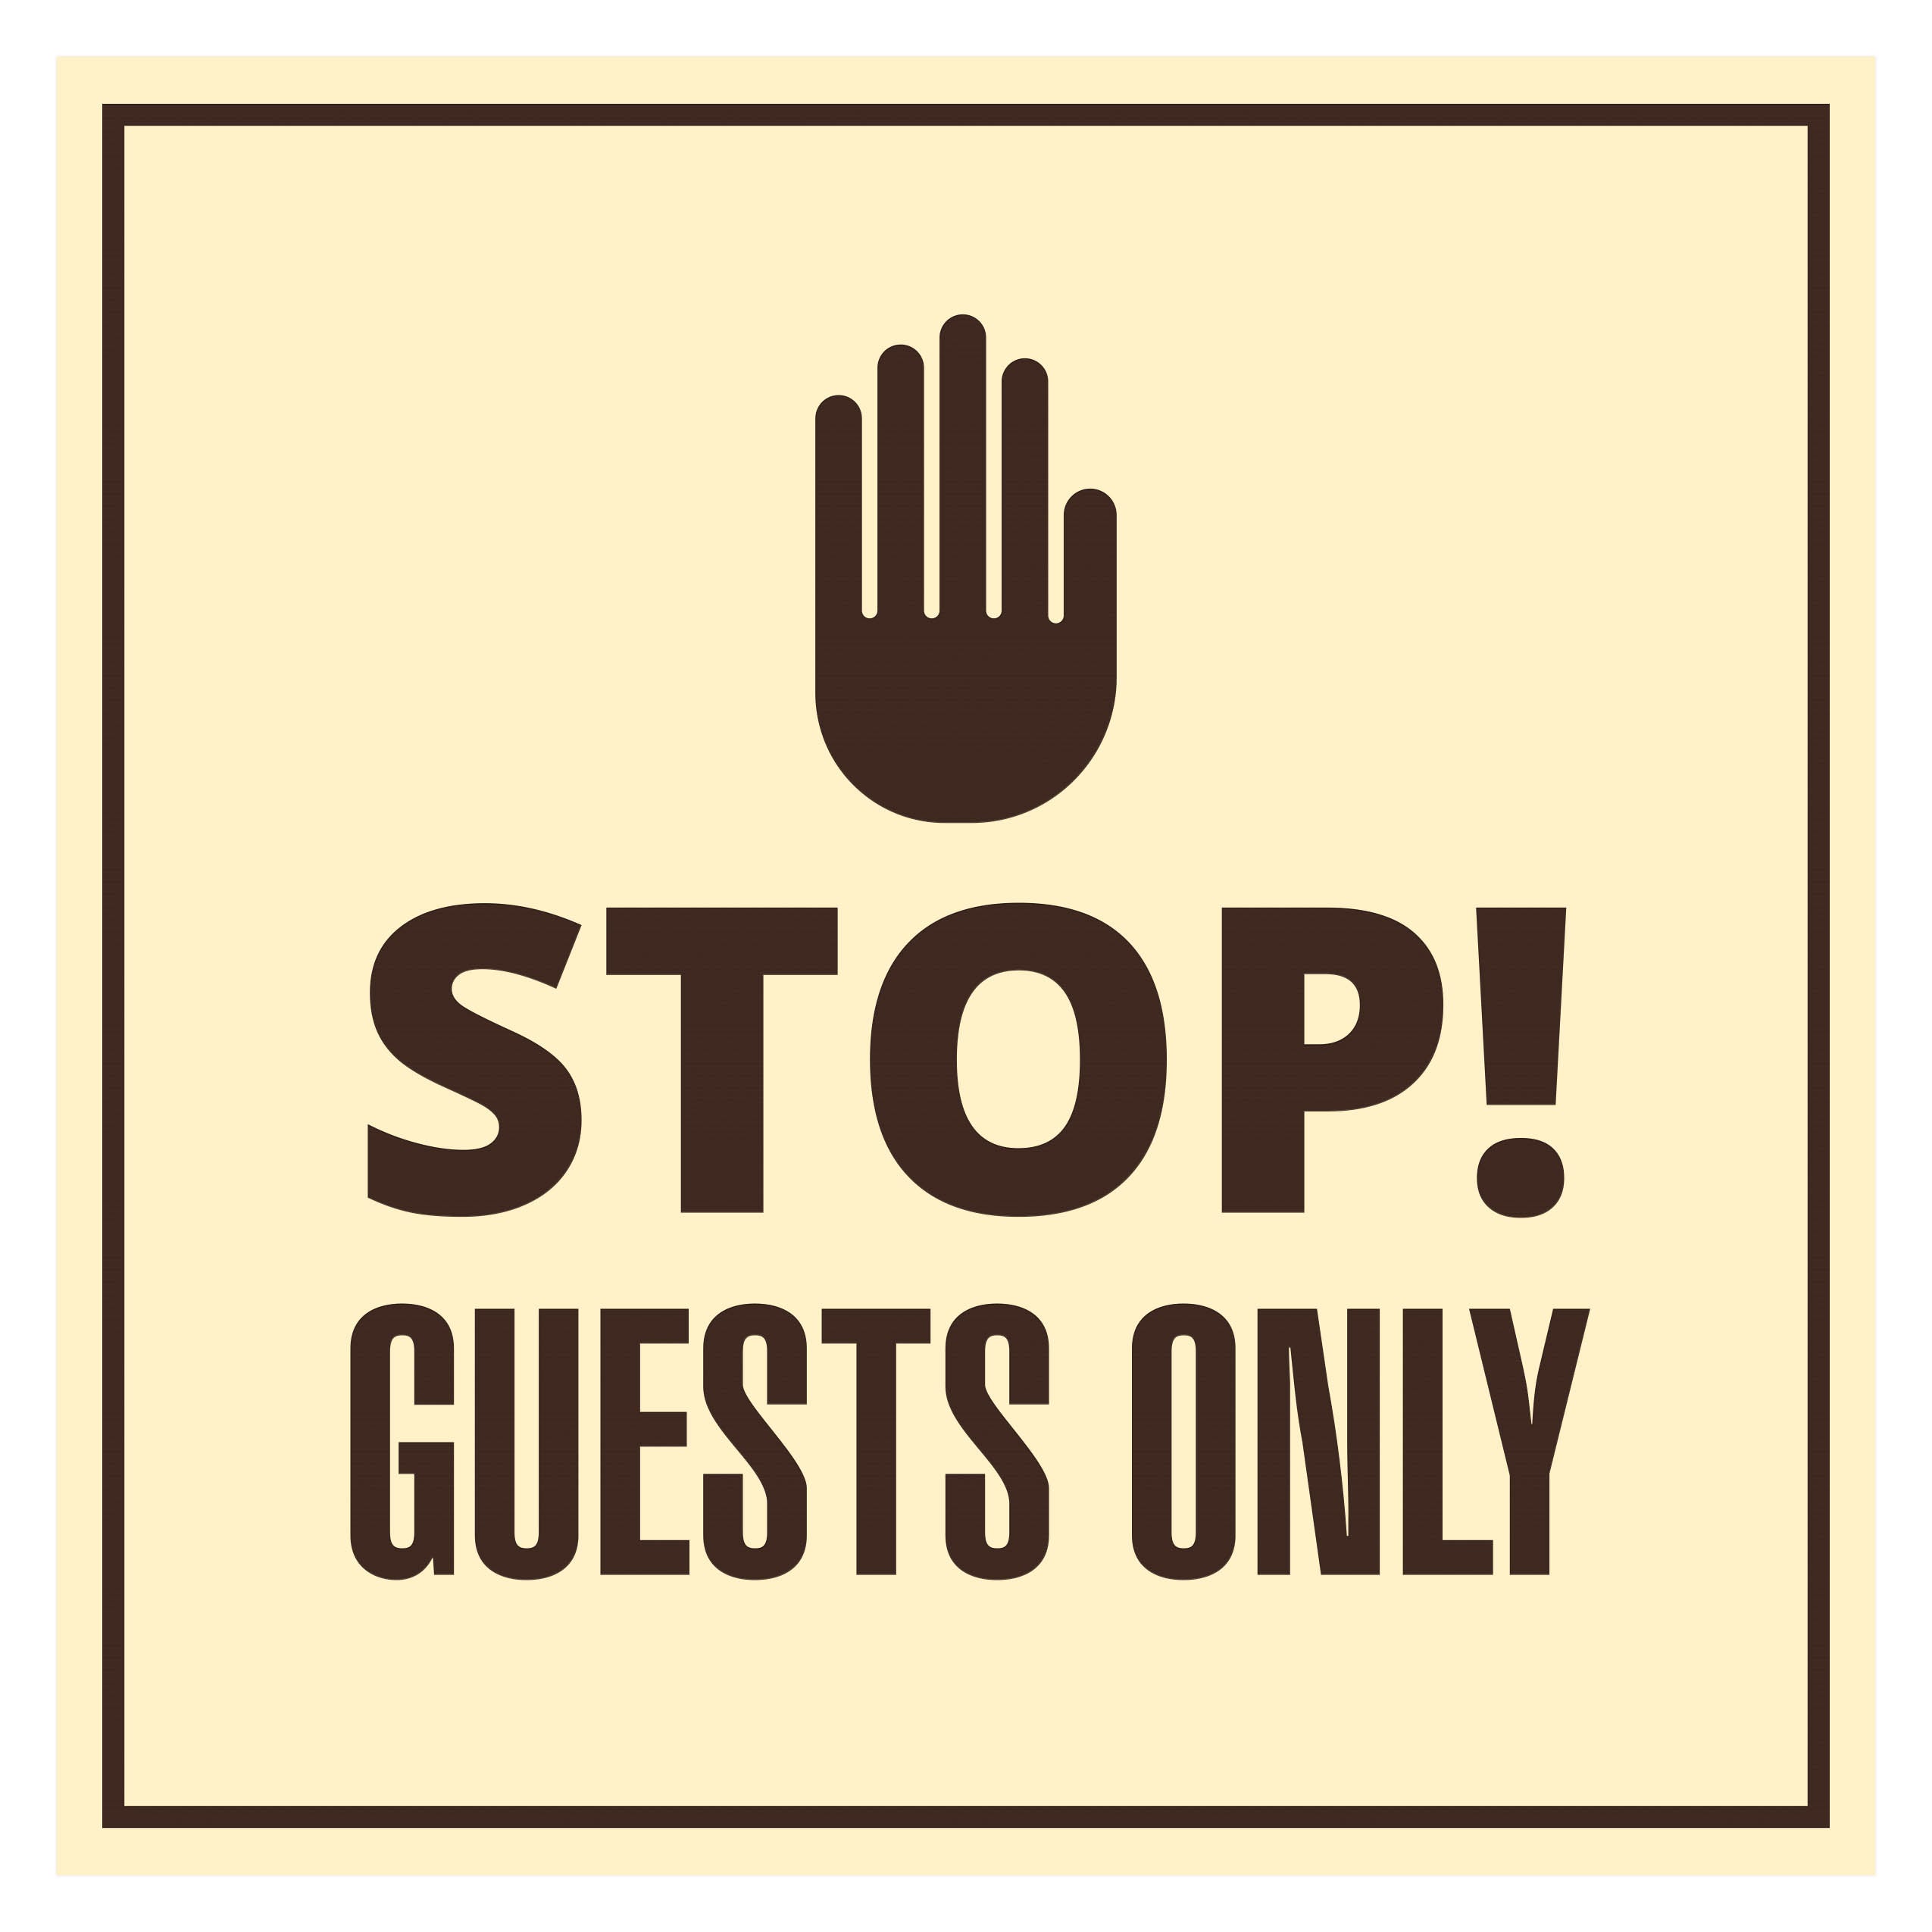 Signs ByLITA Square Stop! Guests Only Wall or Door Sign